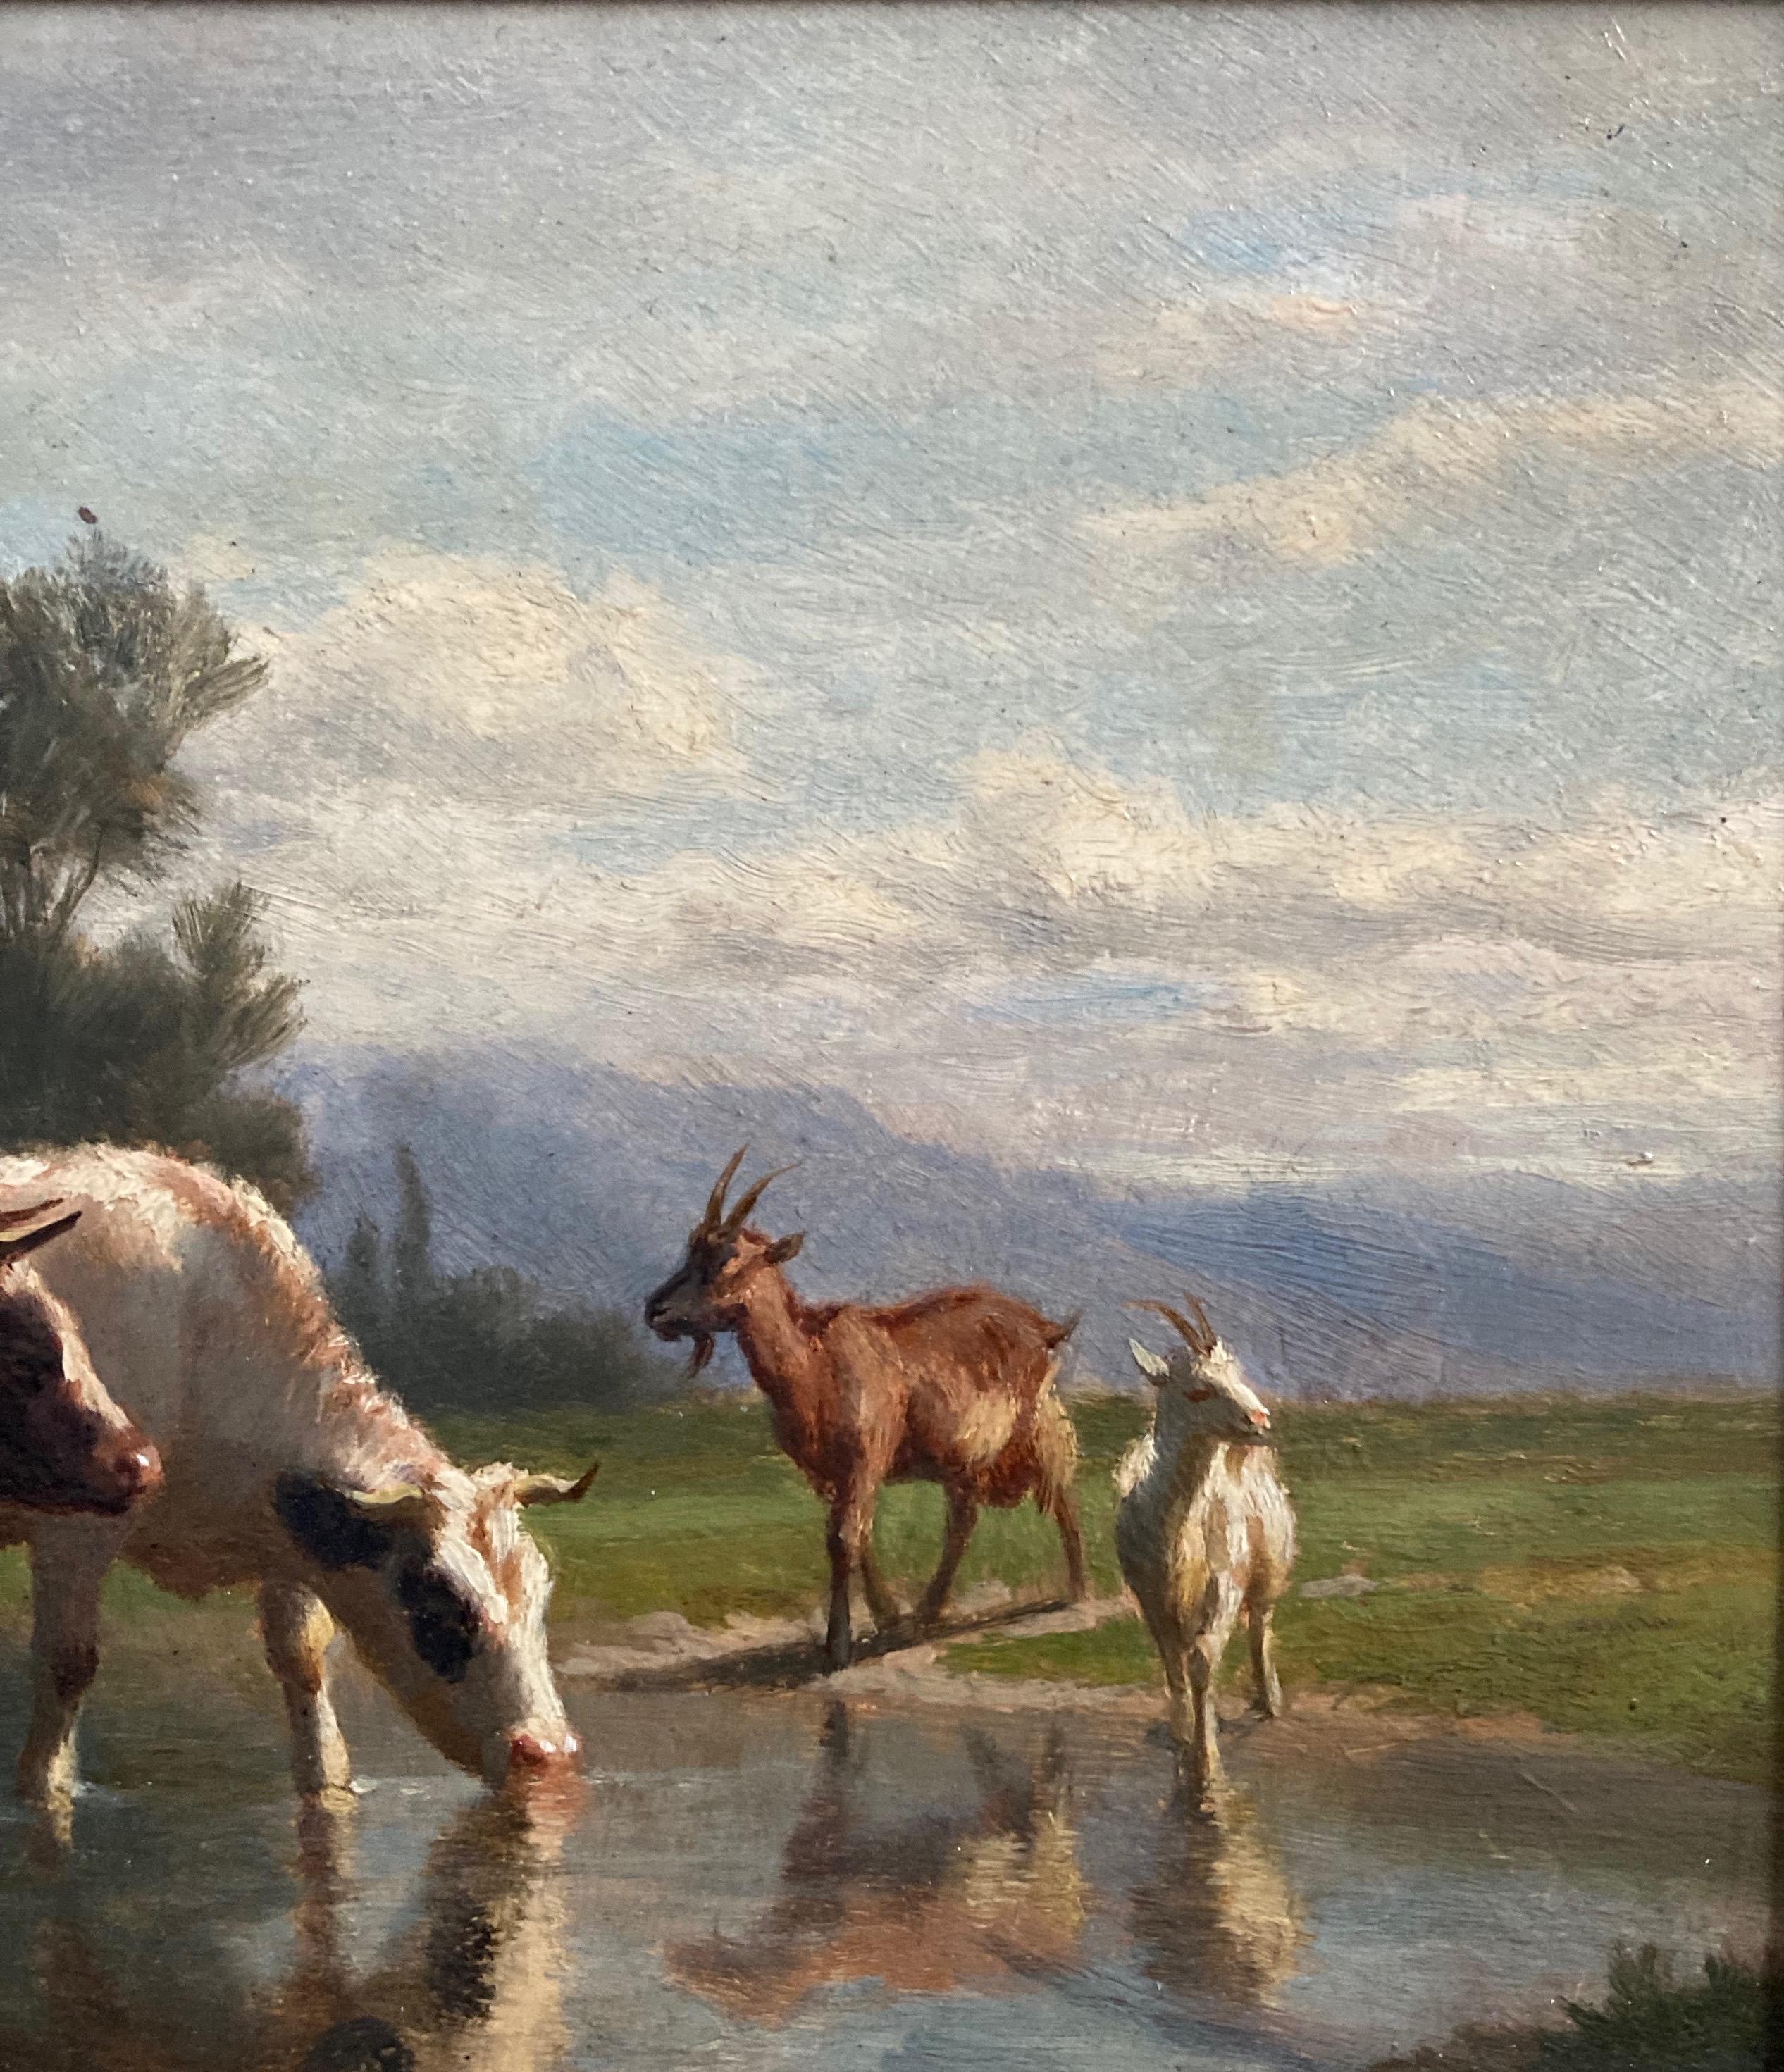 A beautifully painted scene with cattle and goats watering in an Alpine lake.

Charles Humbert (1813-1881)
Cattle and goats watering at an Alpine lake
Signed and indistinctly dated '1844'
Oil on panel
6 x 8¼ inches
12 x 14½ inches with the